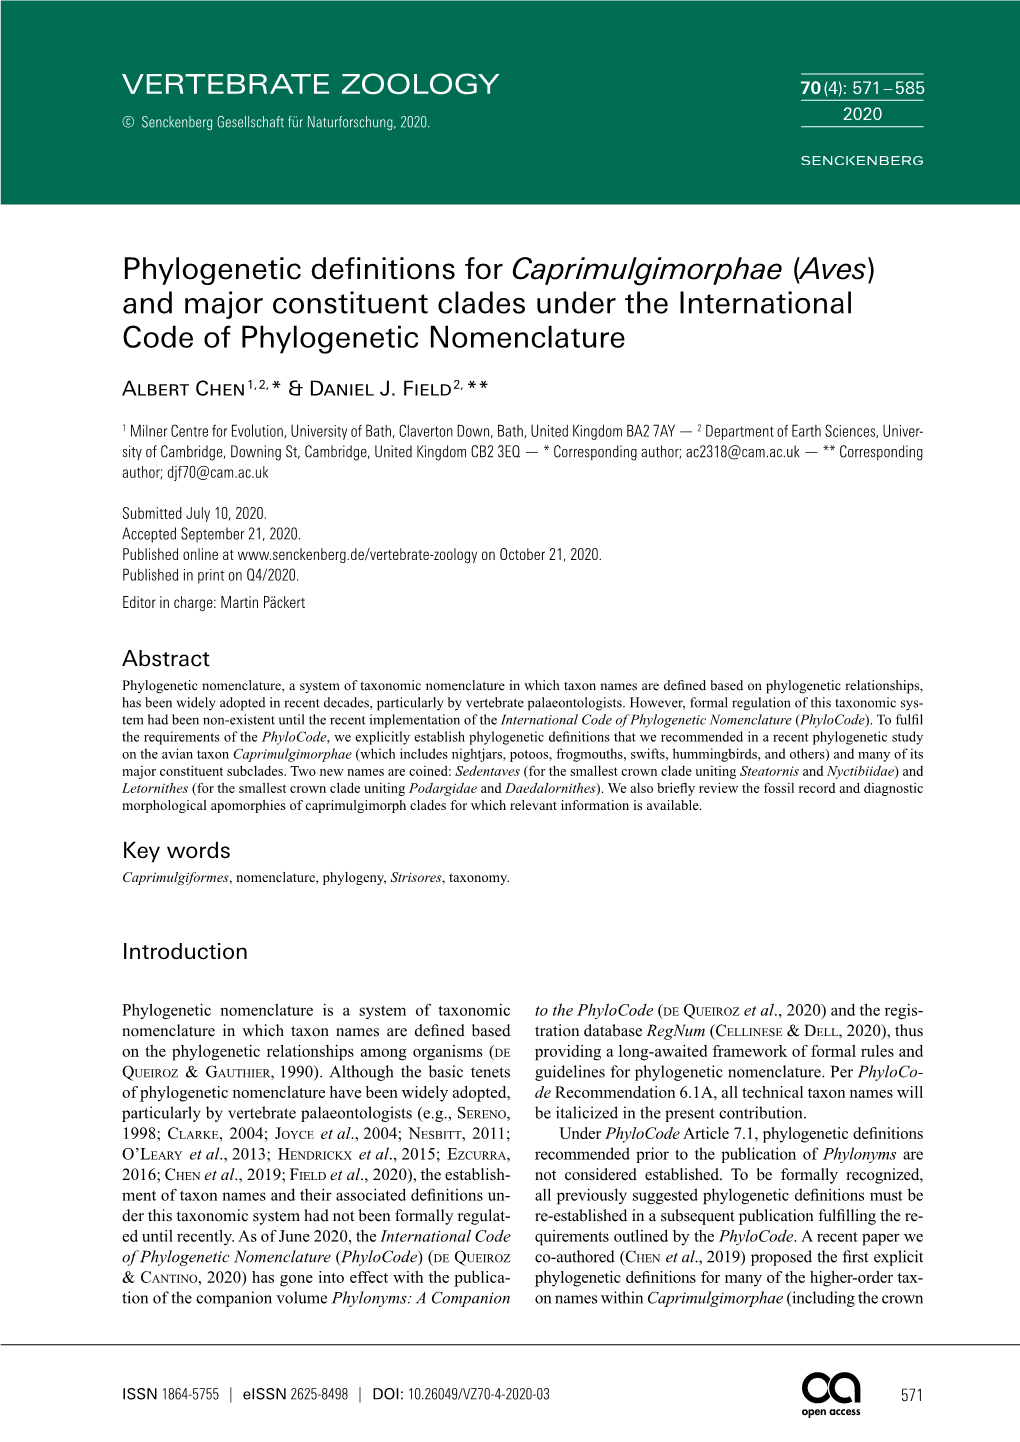 Phylogenetic Definitions for Caprimulgimorphae (Aves) and Major Constituent Clades Under the International Code of Phylogenetic Nomenclature